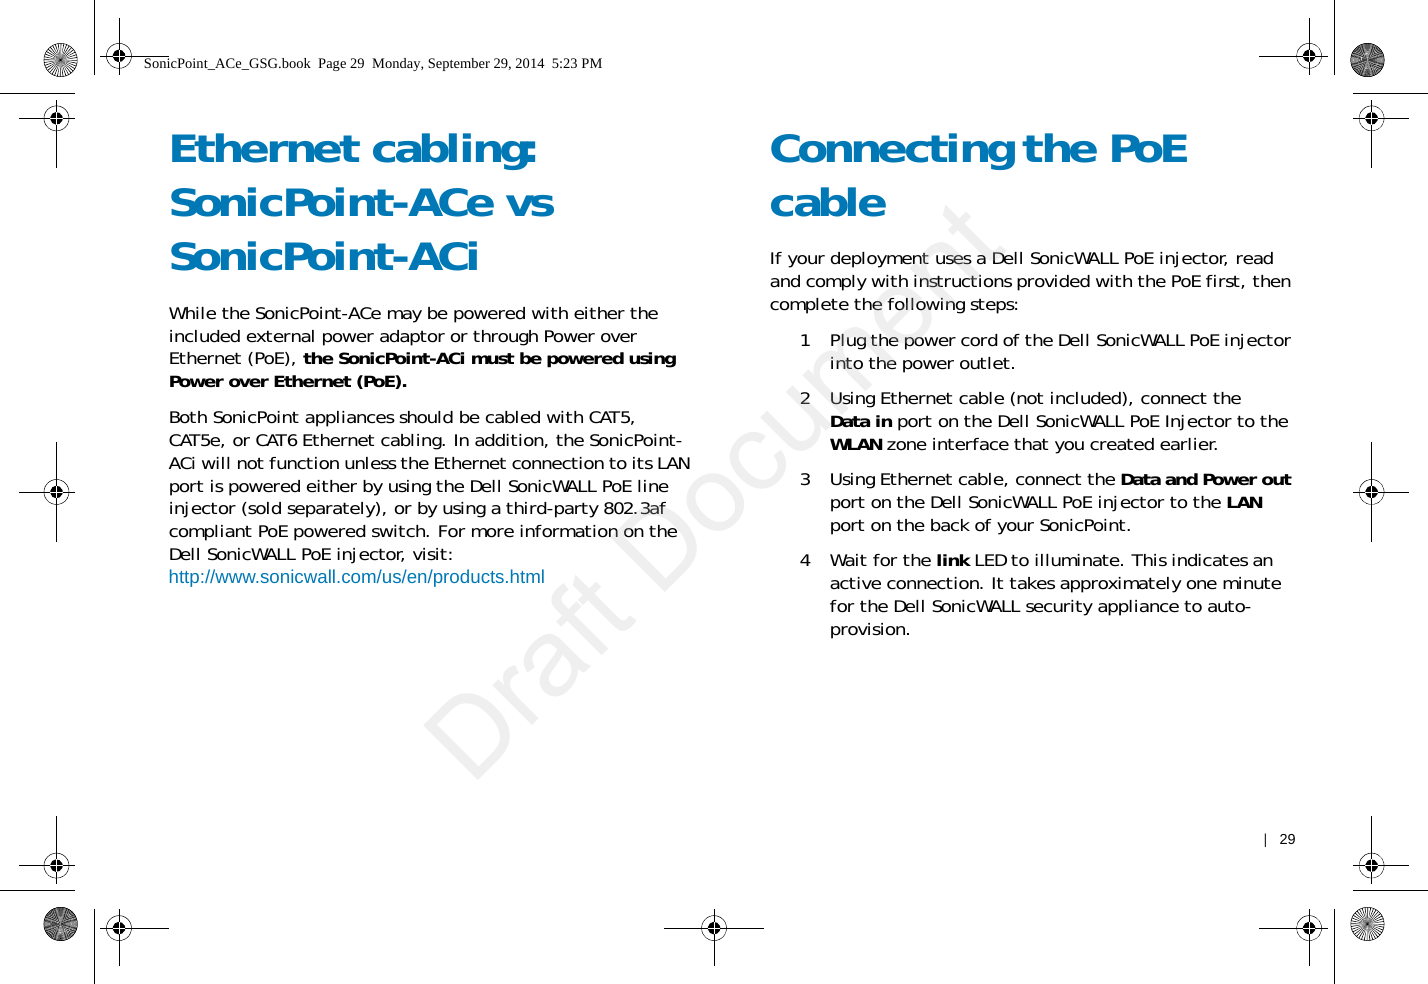    |   29Ethernet cabling: SonicPoint-ACe vs SonicPoint-ACiWhile the SonicPoint-ACe may be powered with either the included external power adaptor or through Power over Ethernet (PoE), the SonicPoint-ACi must be powered using Power over Ethernet (PoE).Both SonicPoint appliances should be cabled with CAT5, CAT5e, or CAT6 Ethernet cabling. In addition, the SonicPoint-ACi will not function unless the Ethernet connection to its LAN port is powered either by using the Dell SonicWALL PoE line injector (sold separately), or by using a third-party 802.3af compliant PoE powered switch. For more information on the Dell SonicWALL PoE injector, visit:http://www.sonicwall.com/us/en/products.htmlConnecting the PoE cableIf your deployment uses a Dell SonicWALL PoE injector, read and comply with instructions provided with the PoE first, then complete the following steps: 1 Plug the power cord of the Dell SonicWALL PoE injector into the power outlet. 2 Using Ethernet cable (not included), connect the Data in port on the Dell SonicWALL PoE Injector to the WLAN zone interface that you created earlier.3 Using Ethernet cable, connect the Data and Power out port on the Dell SonicWALL PoE injector to the LAN port on the back of your SonicPoint.4Wait for the link LED to illuminate. This indicates an active connection. It takes approximately one minute for the Dell SonicWALL security appliance to auto-provision.SonicPoint_ACe_GSG.book  Page 29  Monday, September 29, 2014  5:23 PMDraft Document